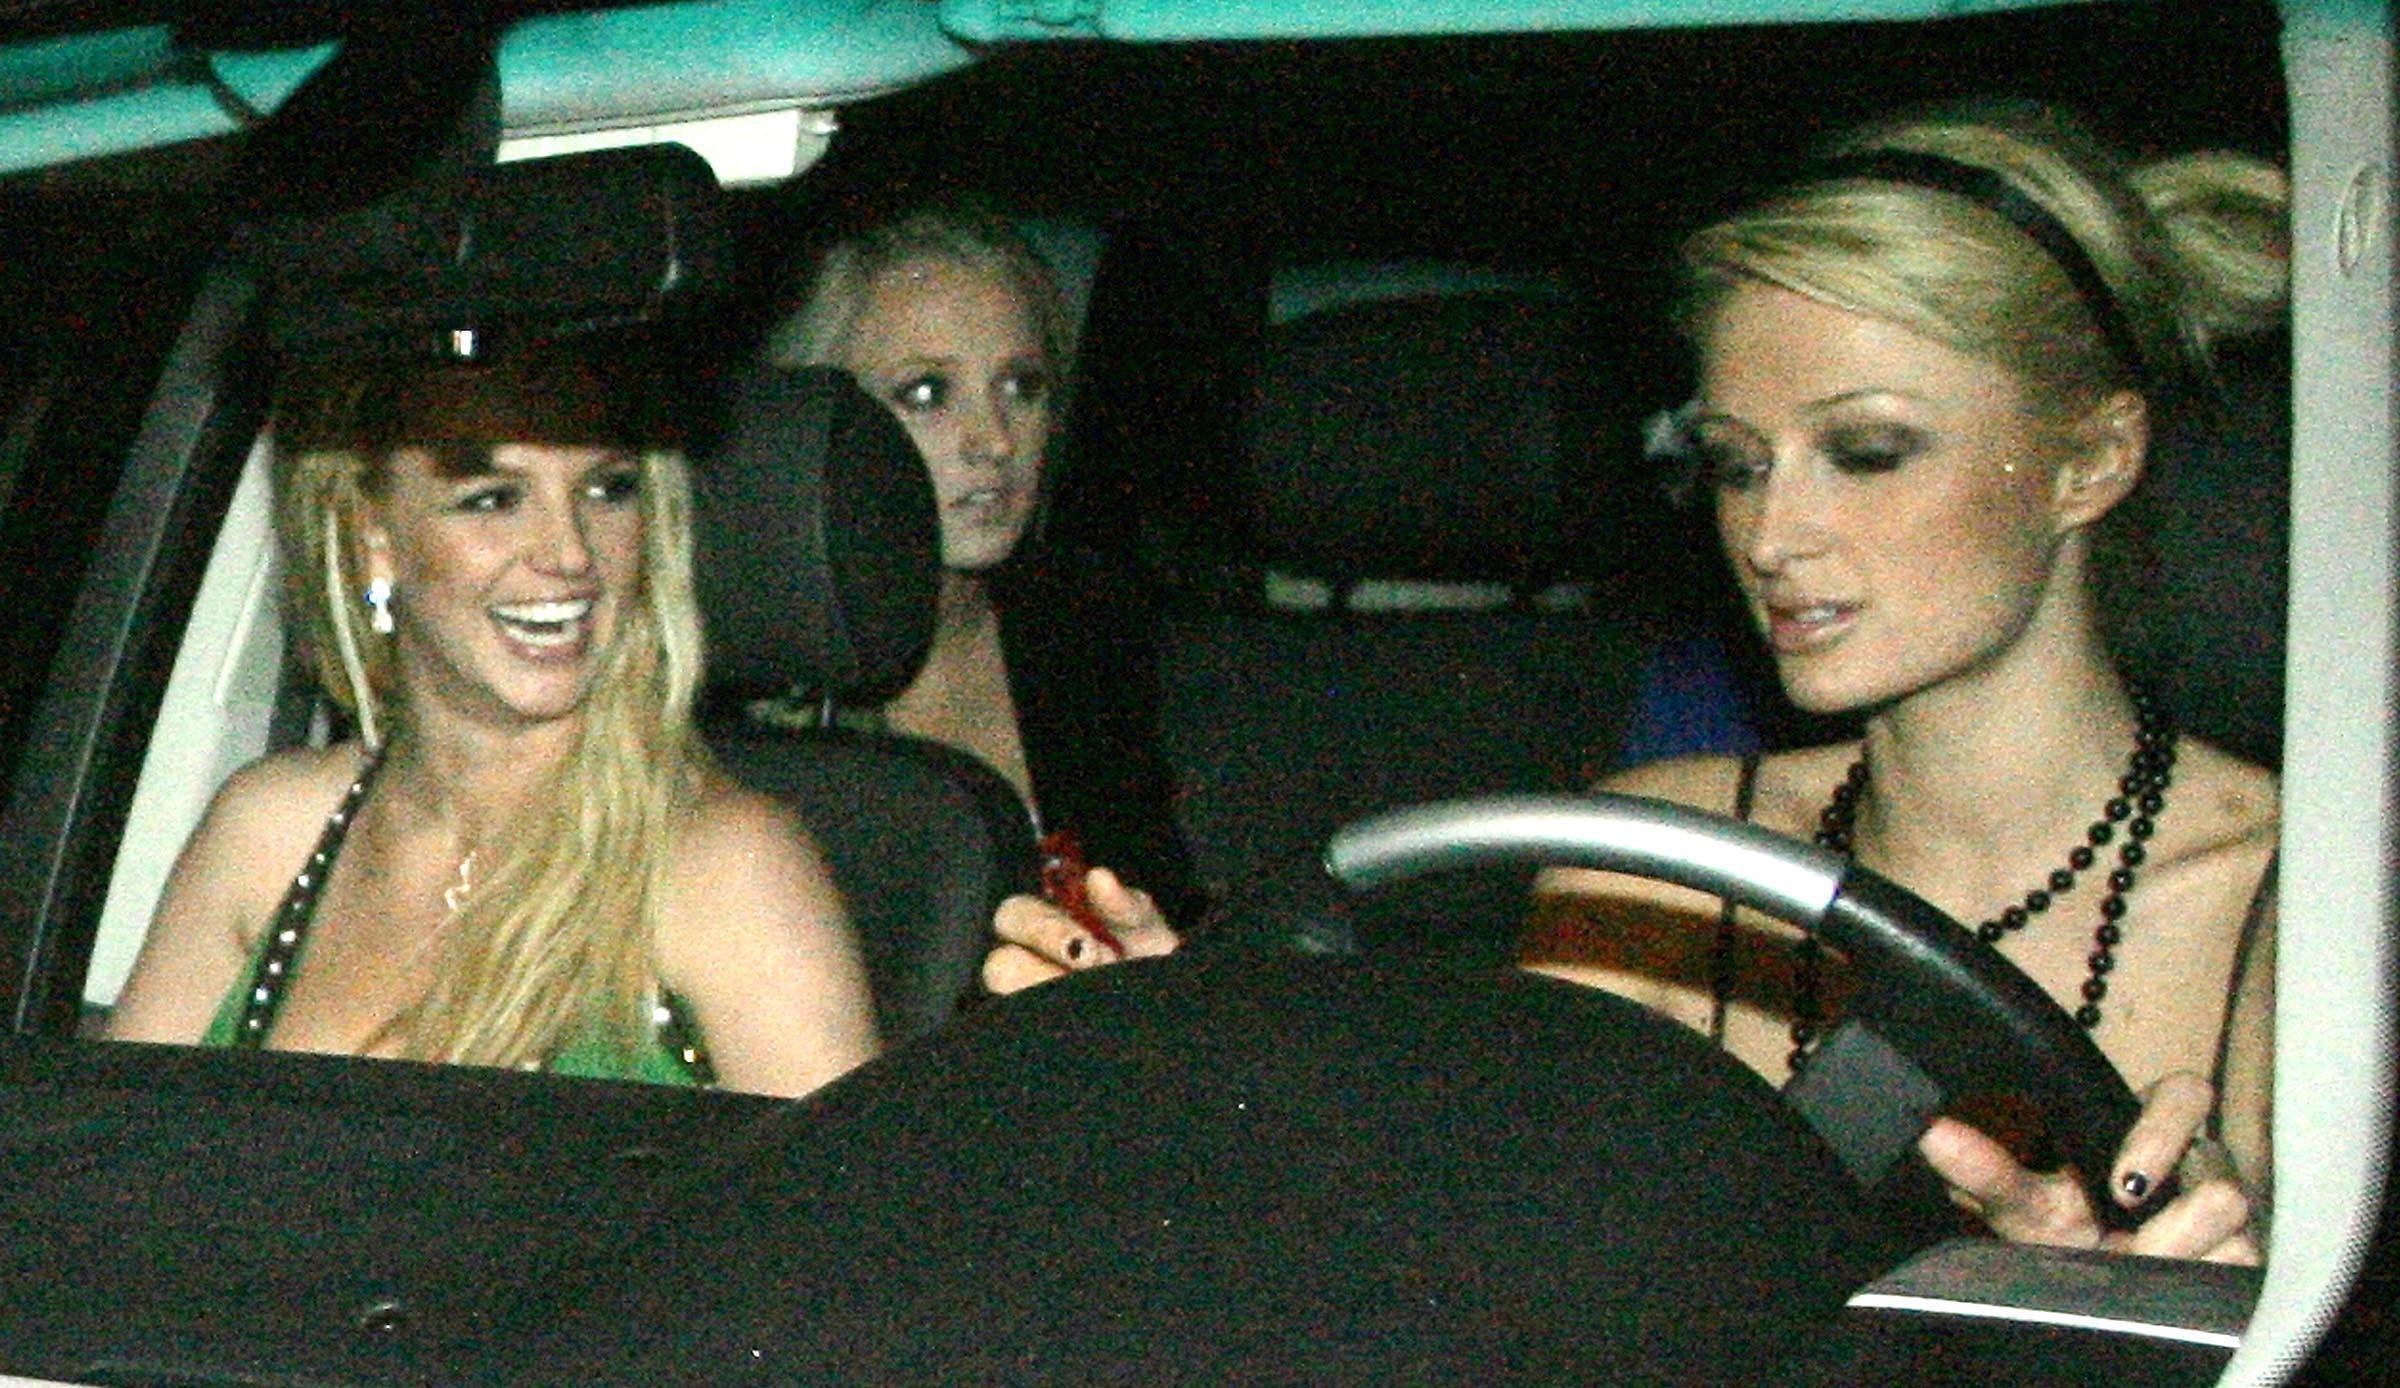 Paris Hilton and Britney Spears photographed inside the car.